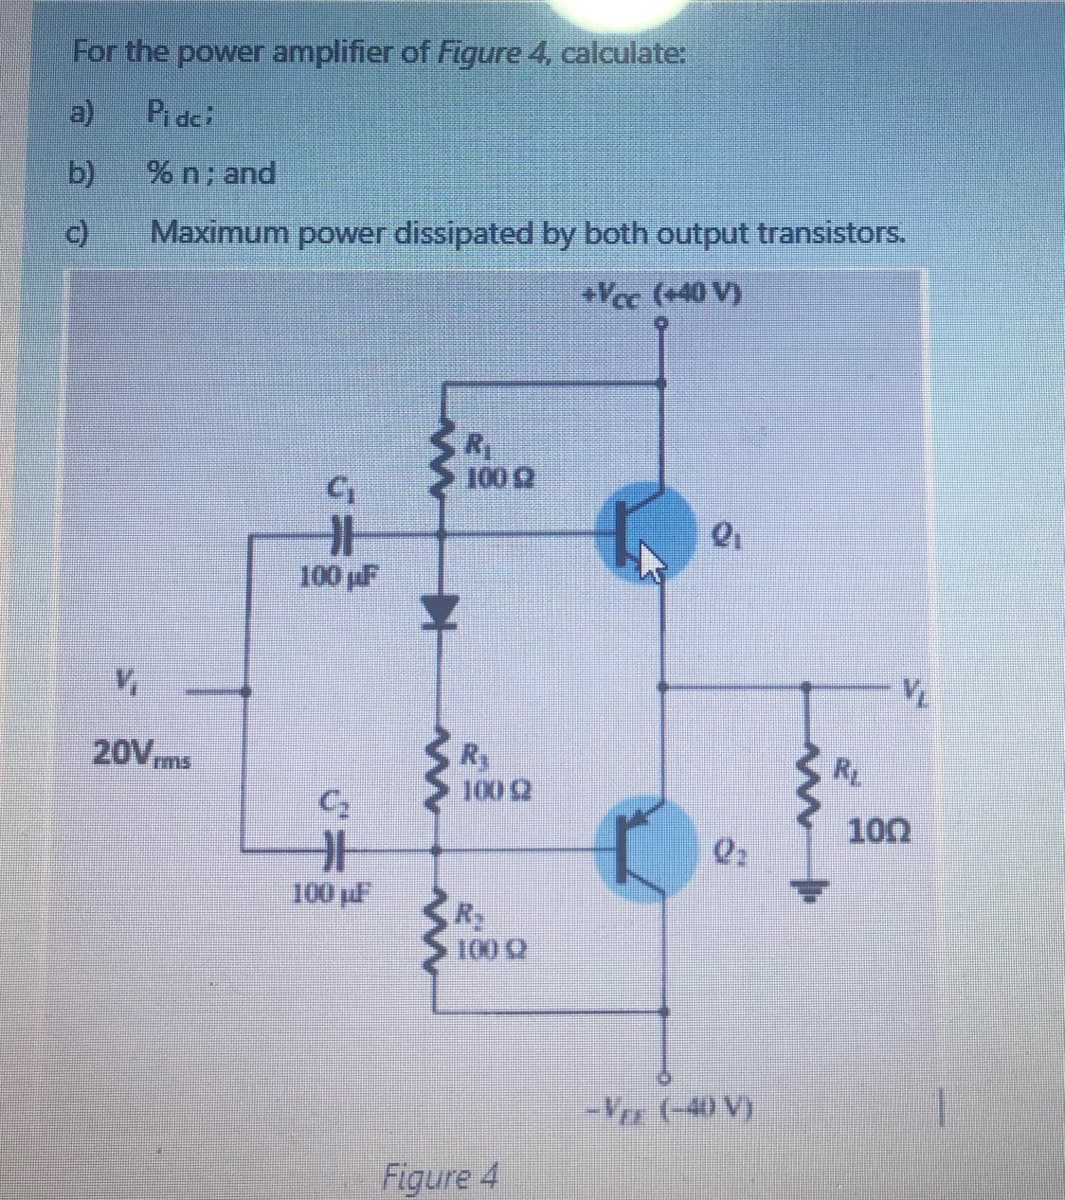 For the power amplifier of Figure 4, calculate:
a)
Pi dci
b)
% n; and
c)
Maximum power dissipated by both output transistors.
+Vec (+40 V)
100 Q
100 pF
20Vms
Ry
100 2
RL
C2
100
100 pl
R
100 2
-V (-40 V)
Figure 4
